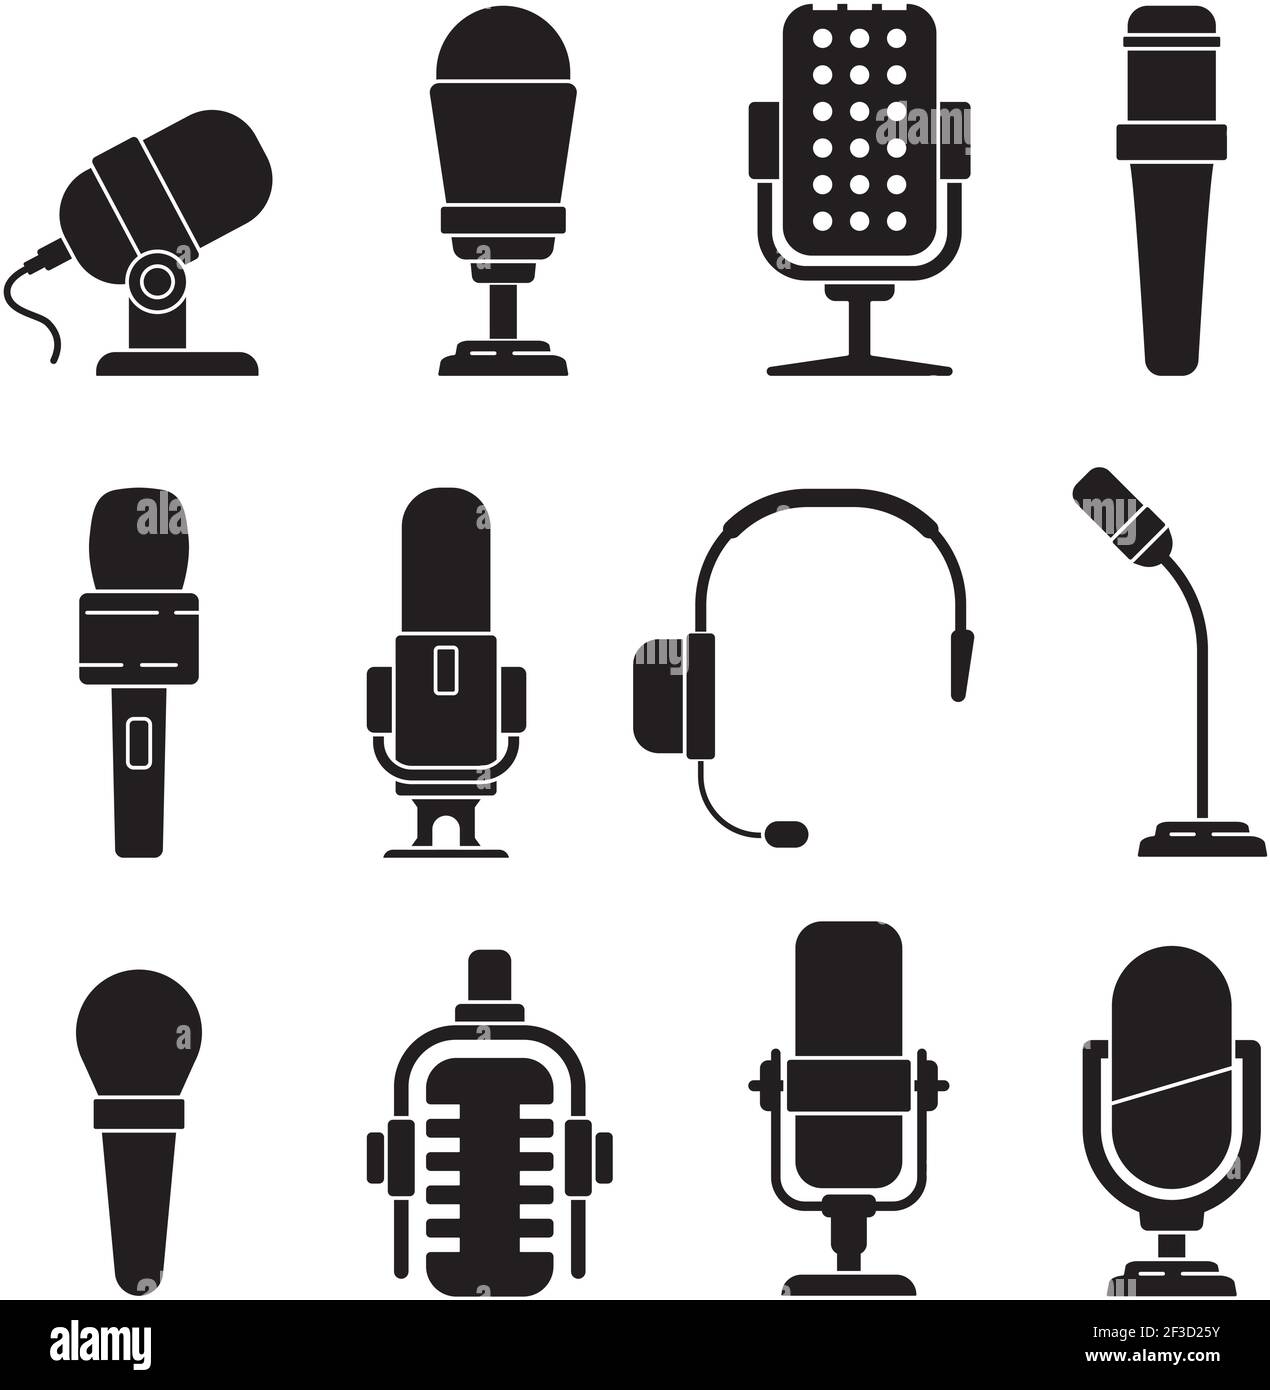 Microphone icons. Music singer items conference recorder for journalists interview tools vector silhouettes Stock Vector